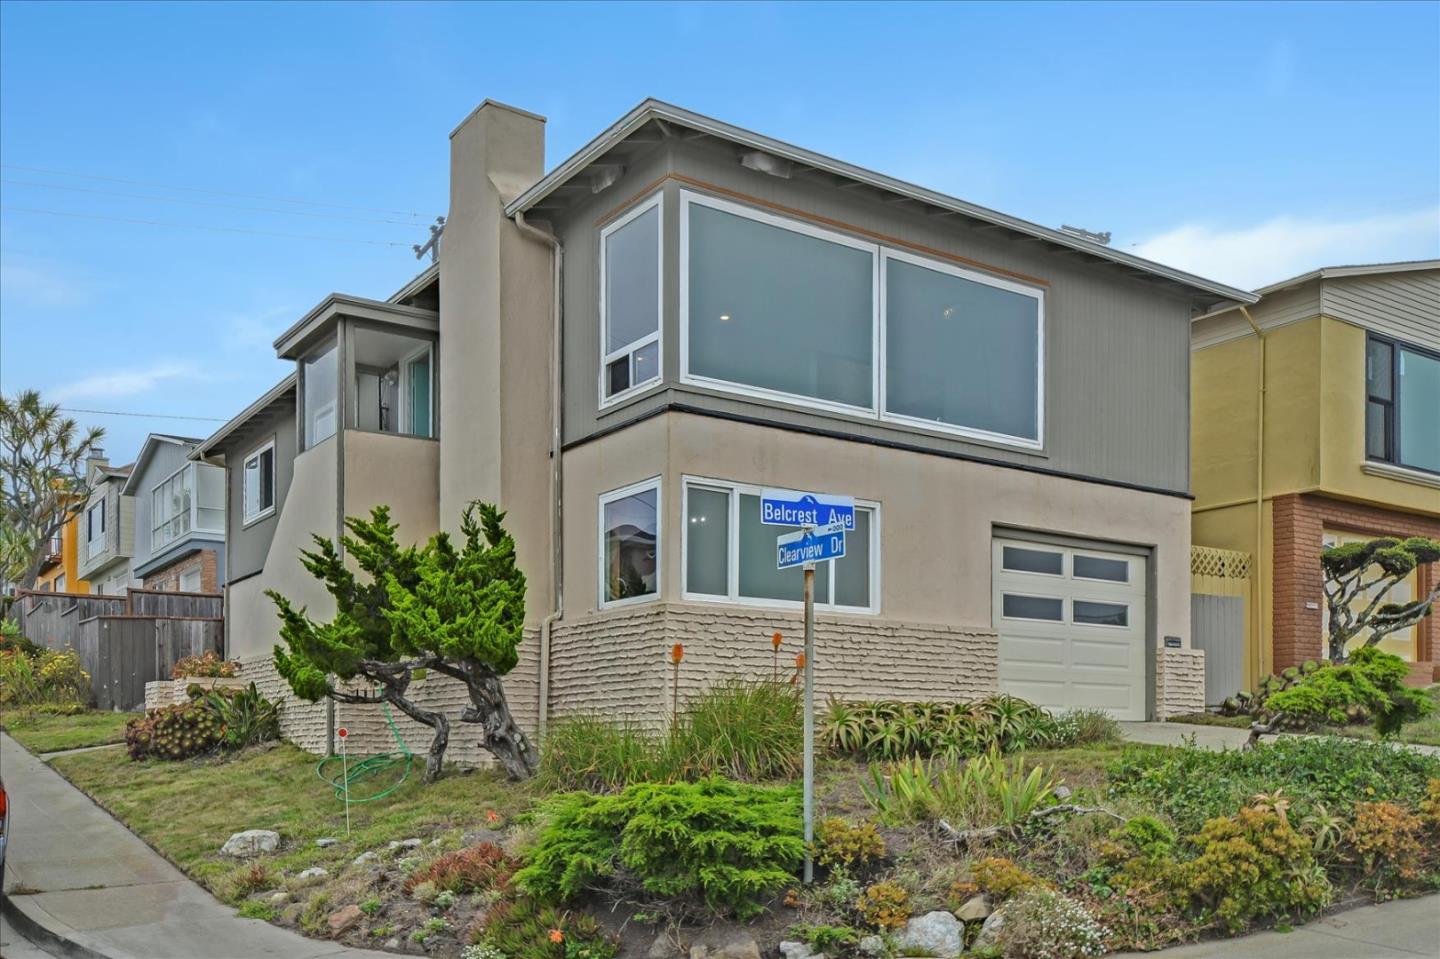 97 Clearview DR, DALY CITY, CA 94015